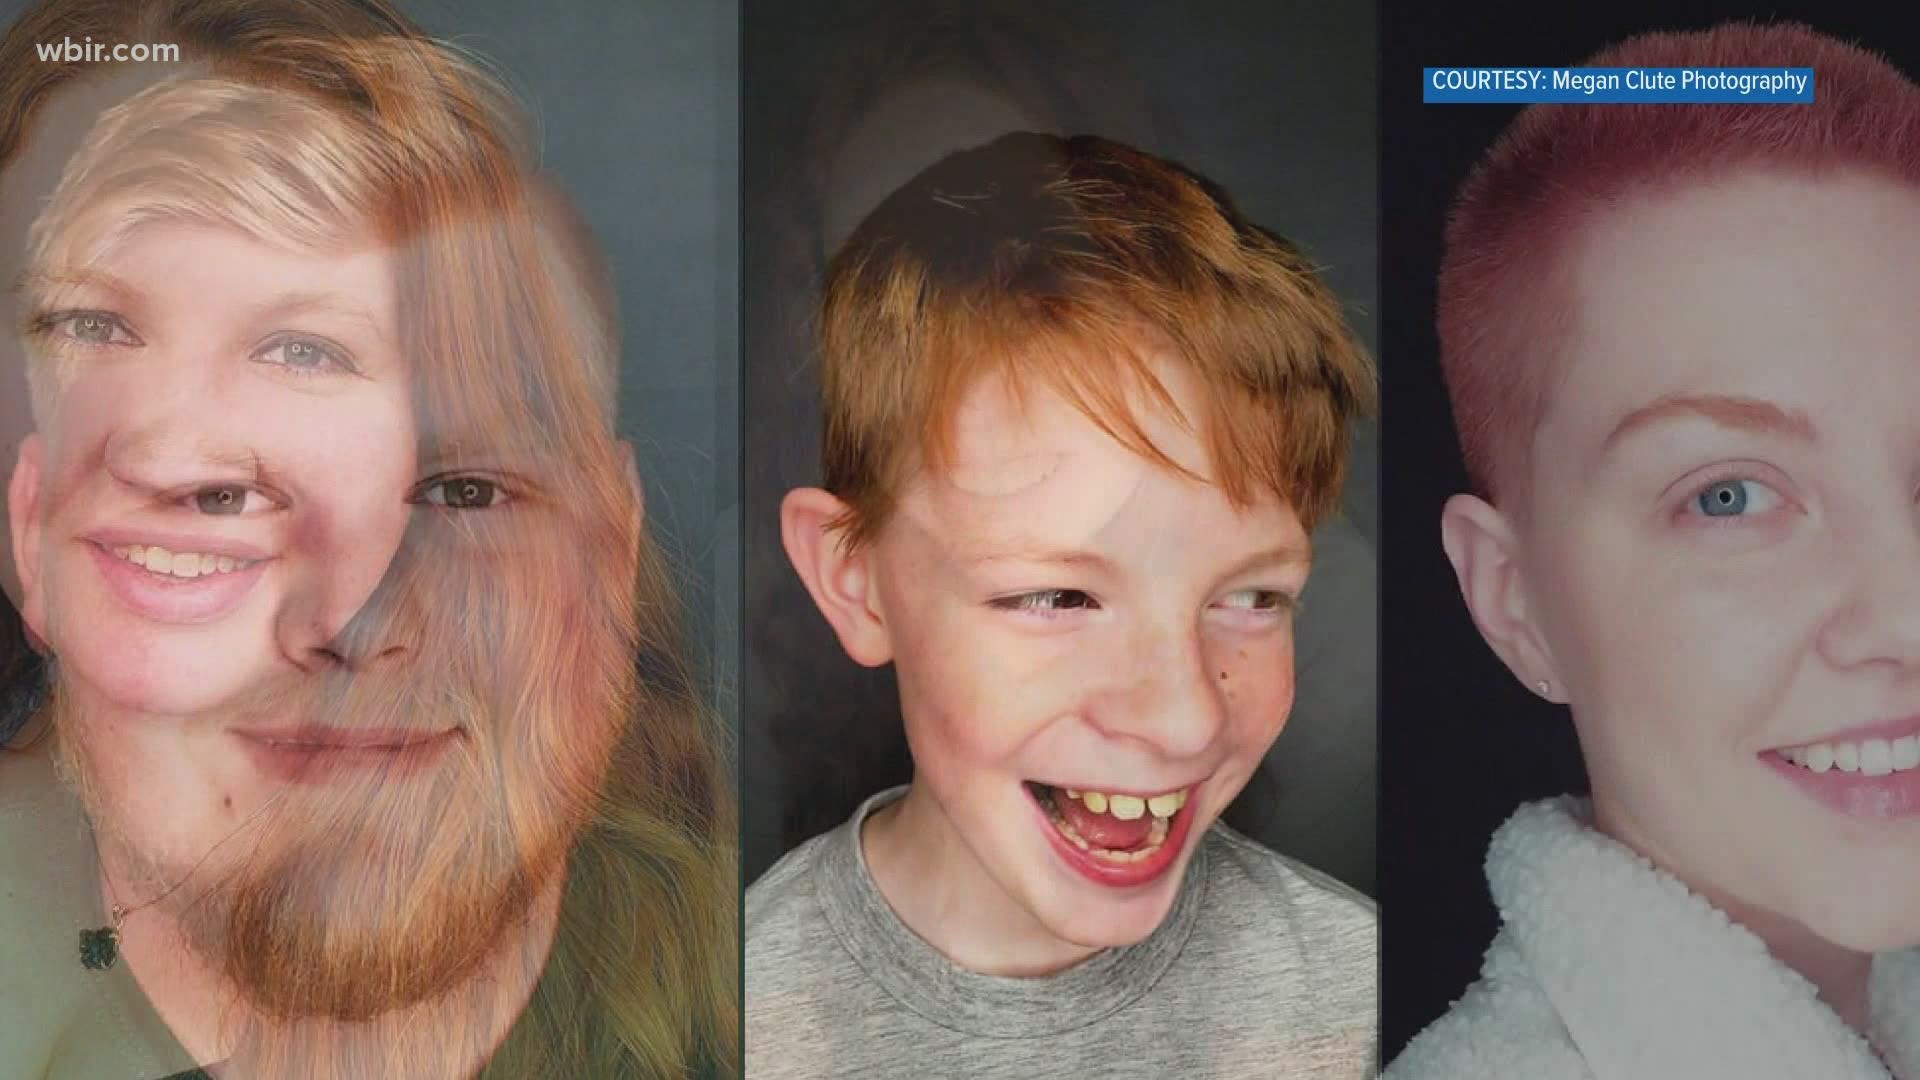 Knoxville photographer who set out to capture the portraits of 100 redheads has overwhelming response. Oct. 26, 2020-4pm.